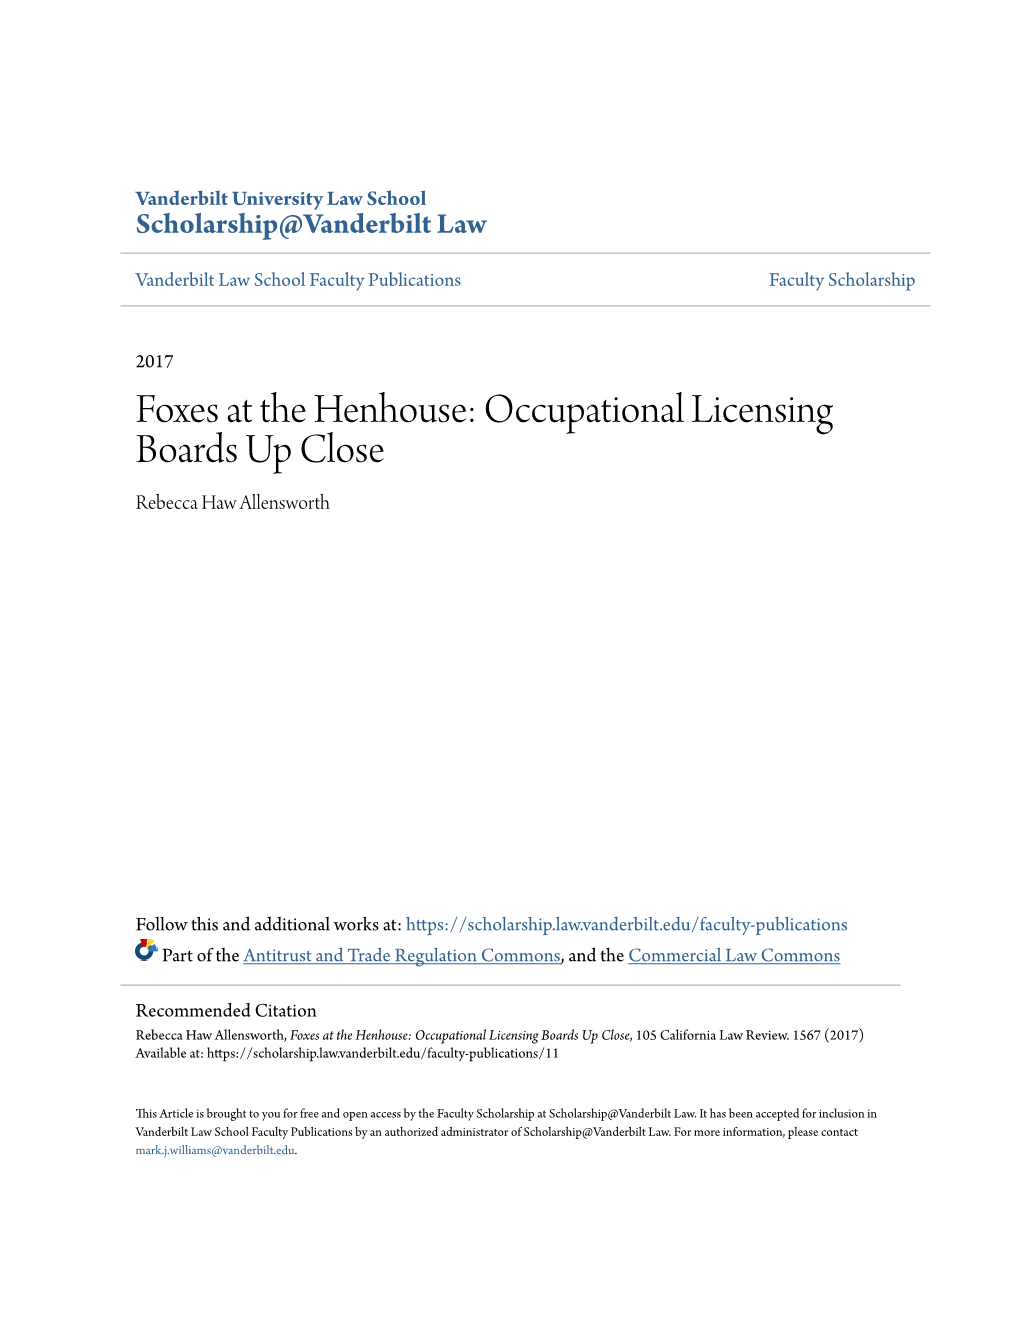 Foxes at the Henhouse: Occupational Licensing Boards up Close Rebecca Haw Allensworth